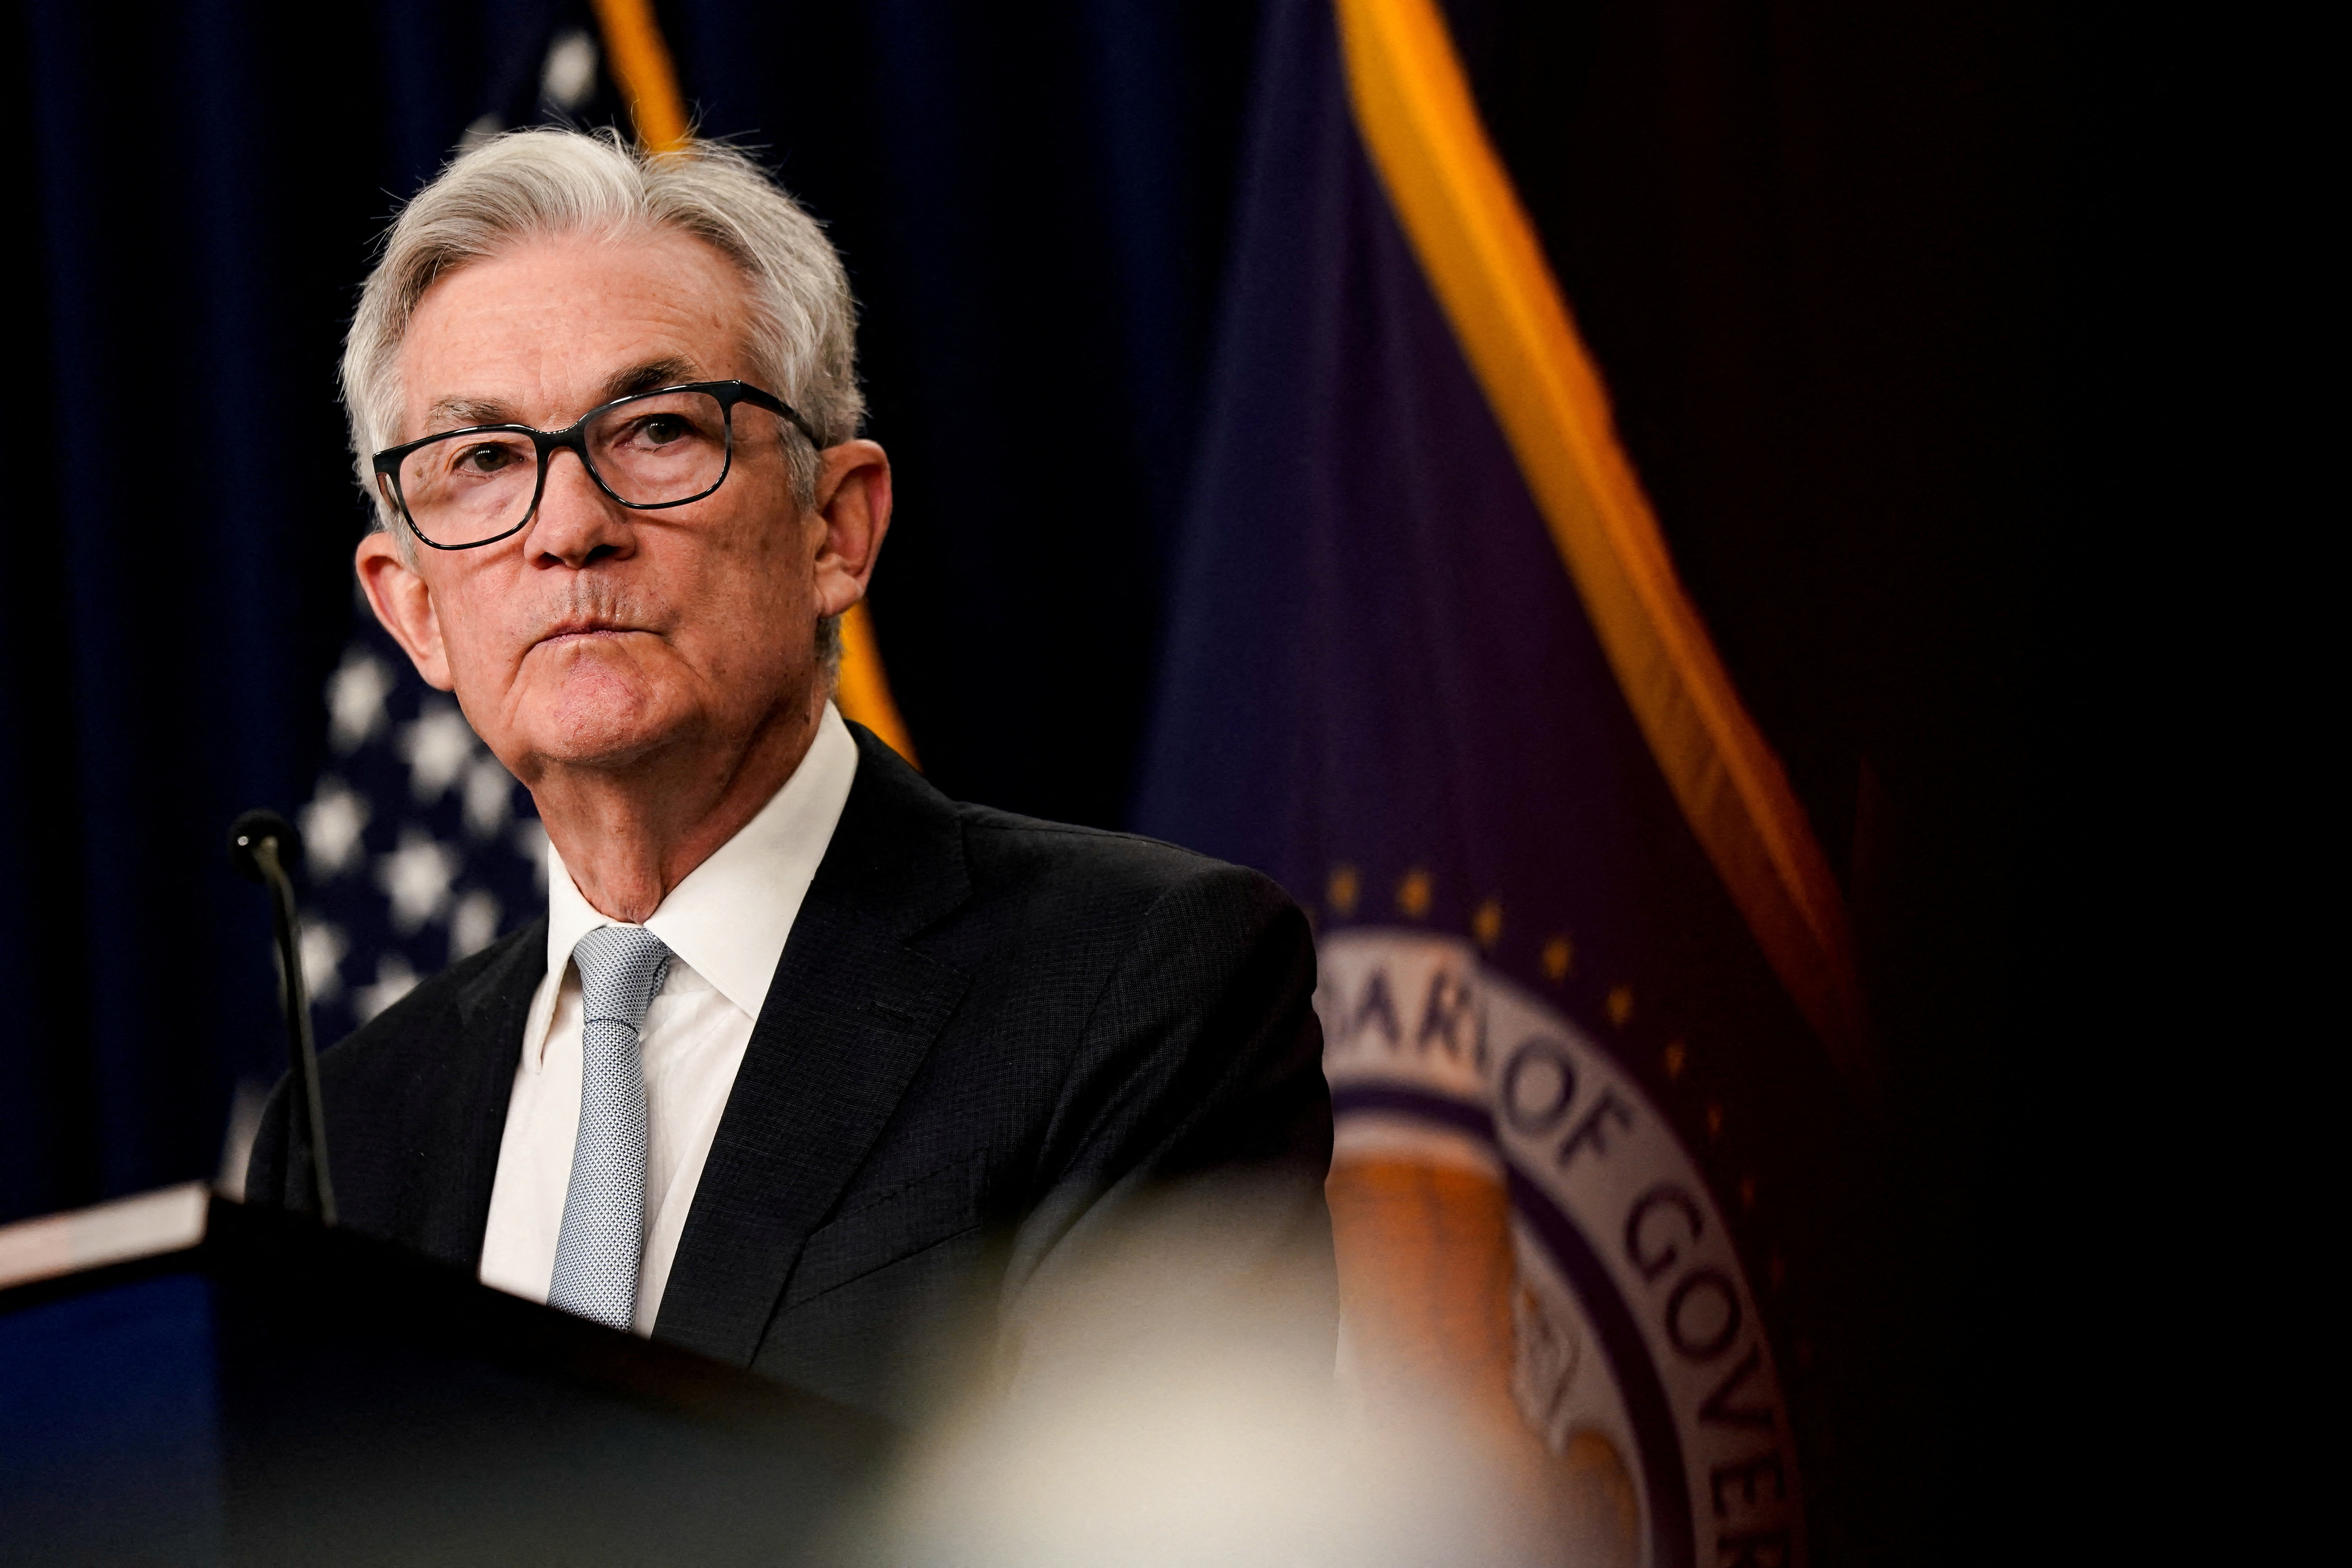 Federal Reserve Chair Powell announces interest rate hike during news conference in Washington